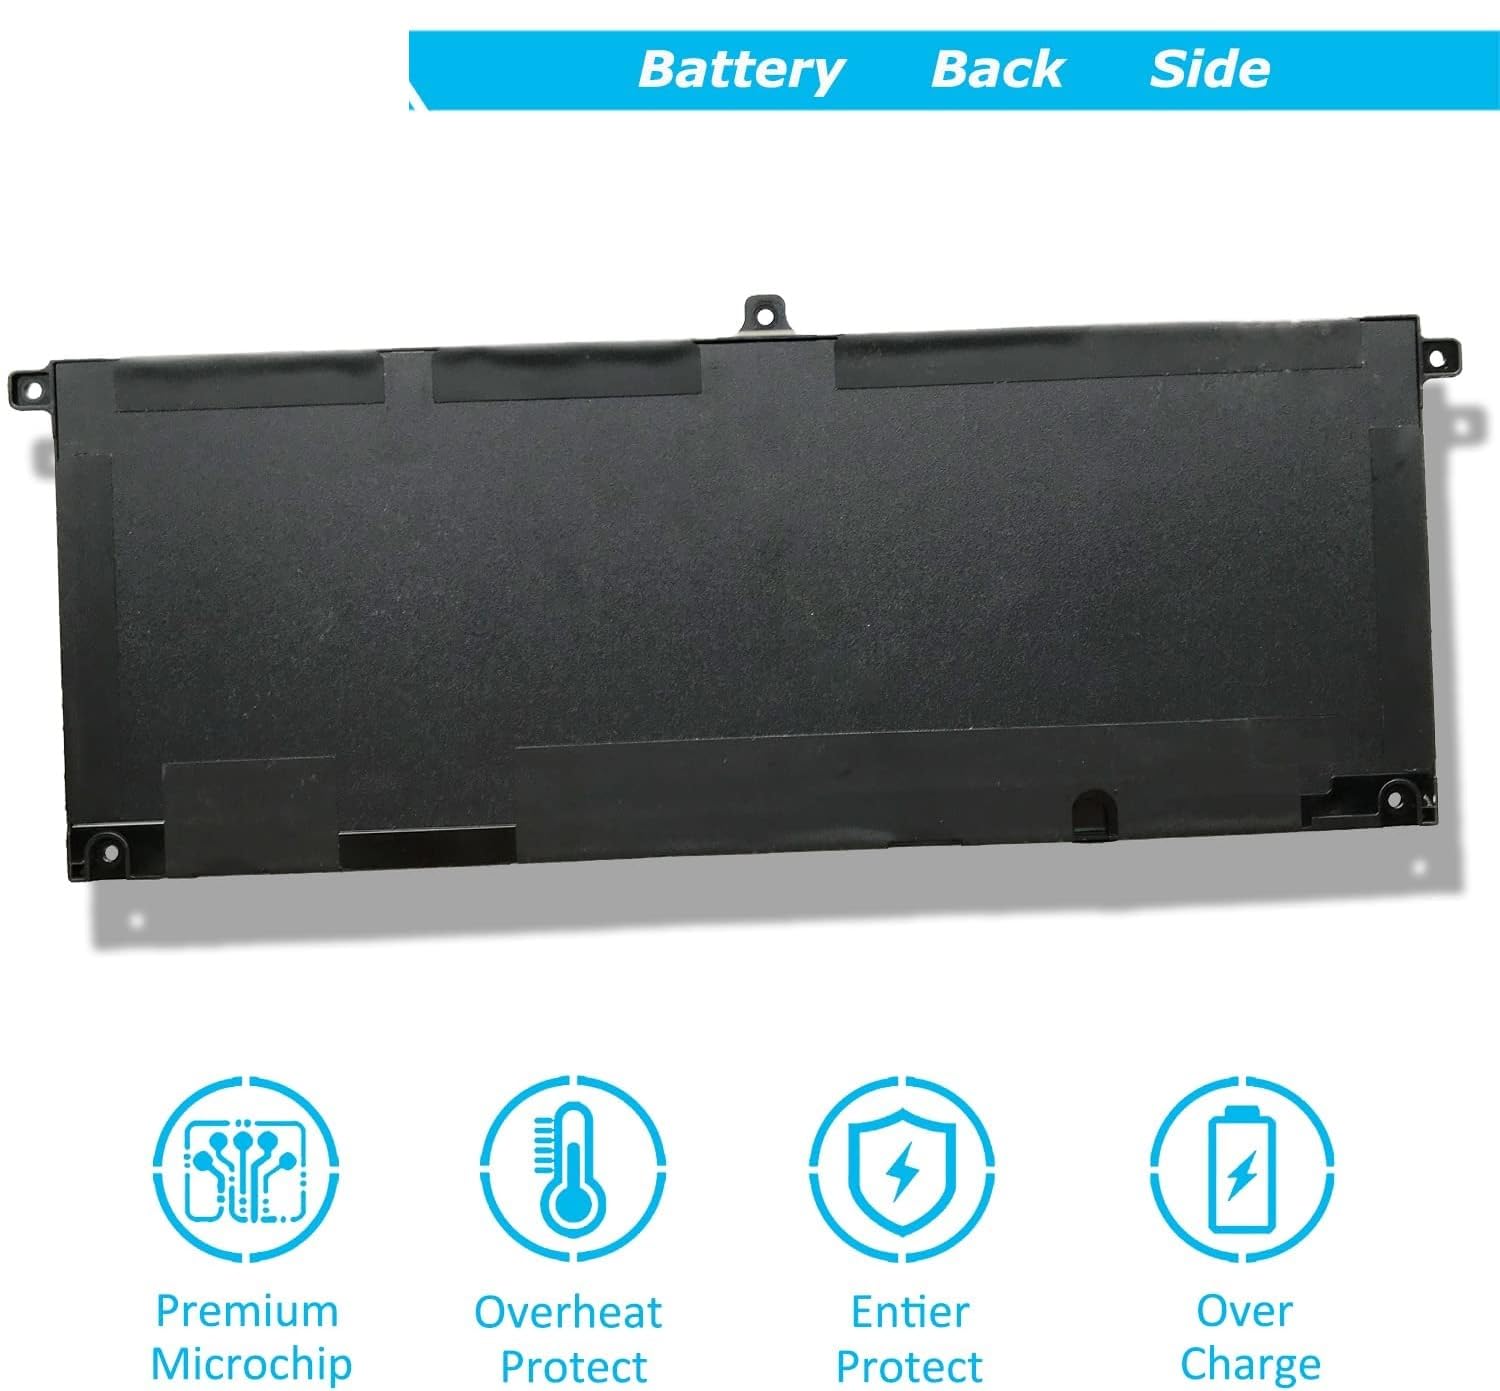 WISTAR H5CKD Laptop Battery Compatible with Vostro 5300 5401 5501 Latitude 3410 3510 Inspiron 5300 5401 5408 5501 5508 5400 7405 7300 7500 2-in-1 Silver Series 07T8CD 0TXD03 09077G JK6Y6â€¦